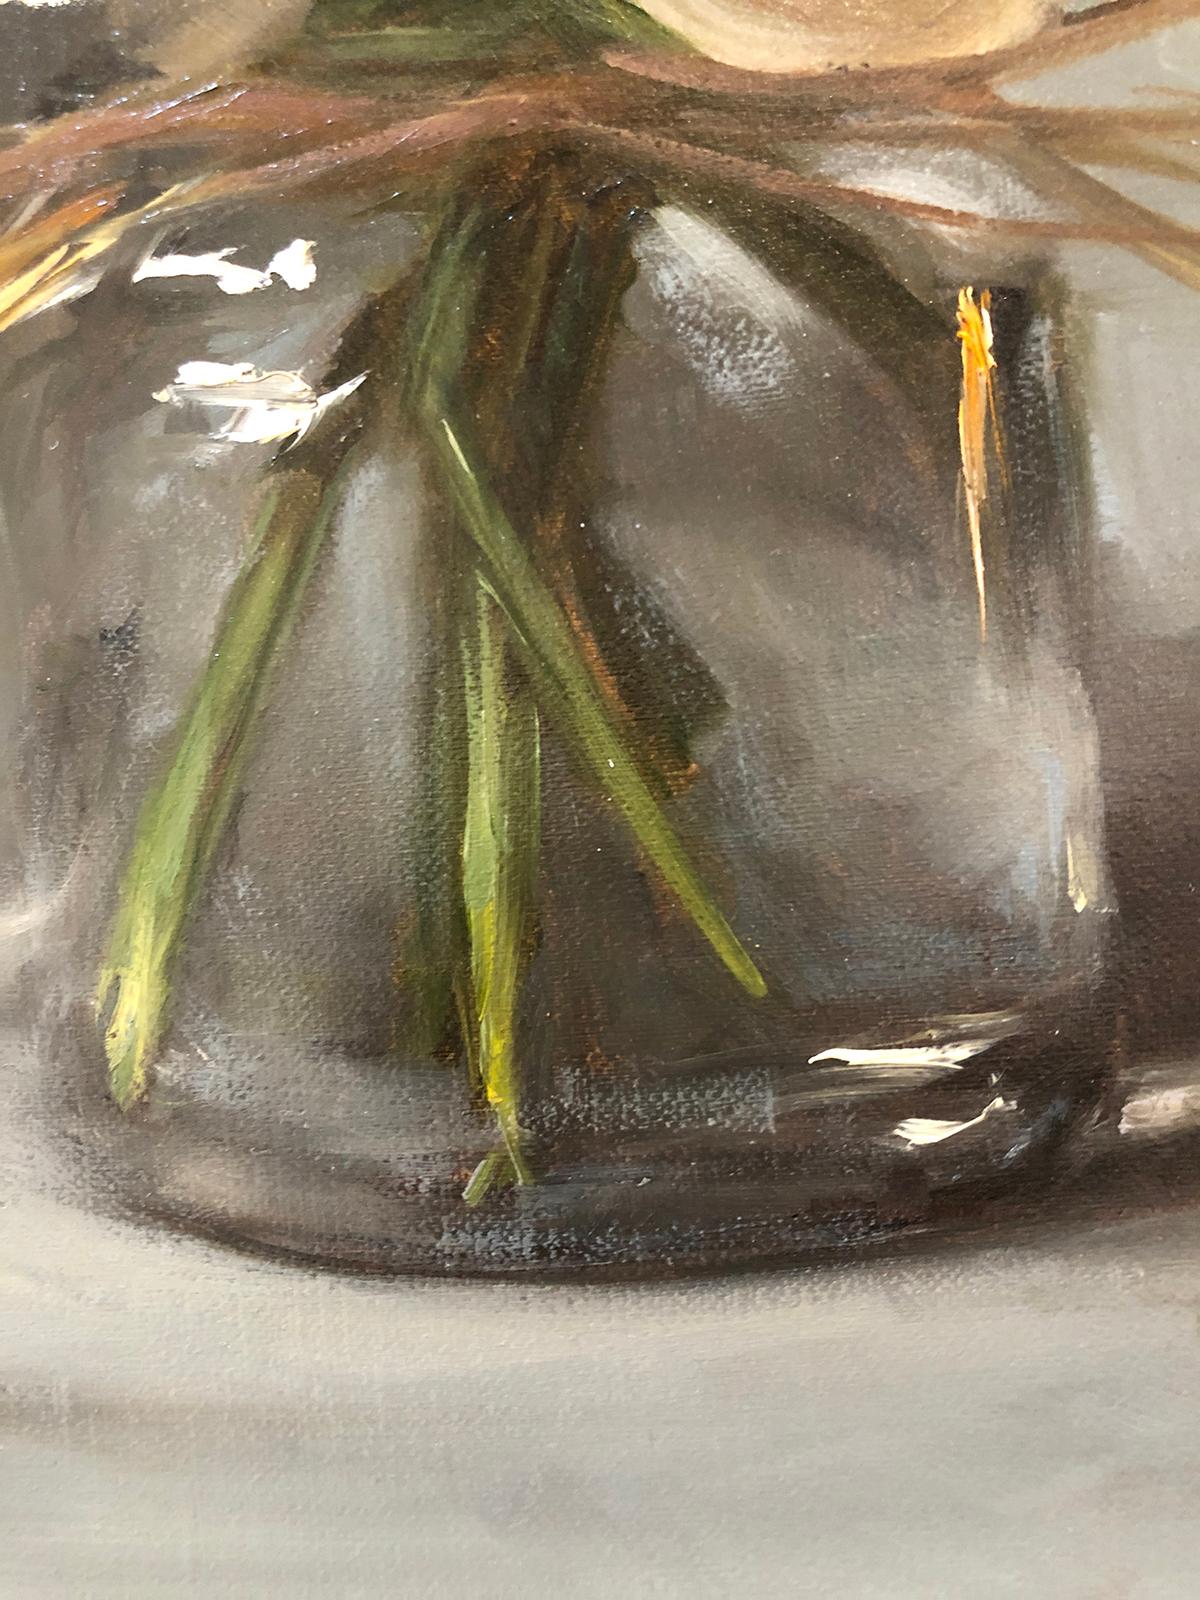 This still life shows a glass vase filled with three ivory/rose colored peonies in full bloom.

Sarah Lamb is a talented and dynamic realist painter. With classical skill—and through transparency, depth and texture—she captures the minute details of